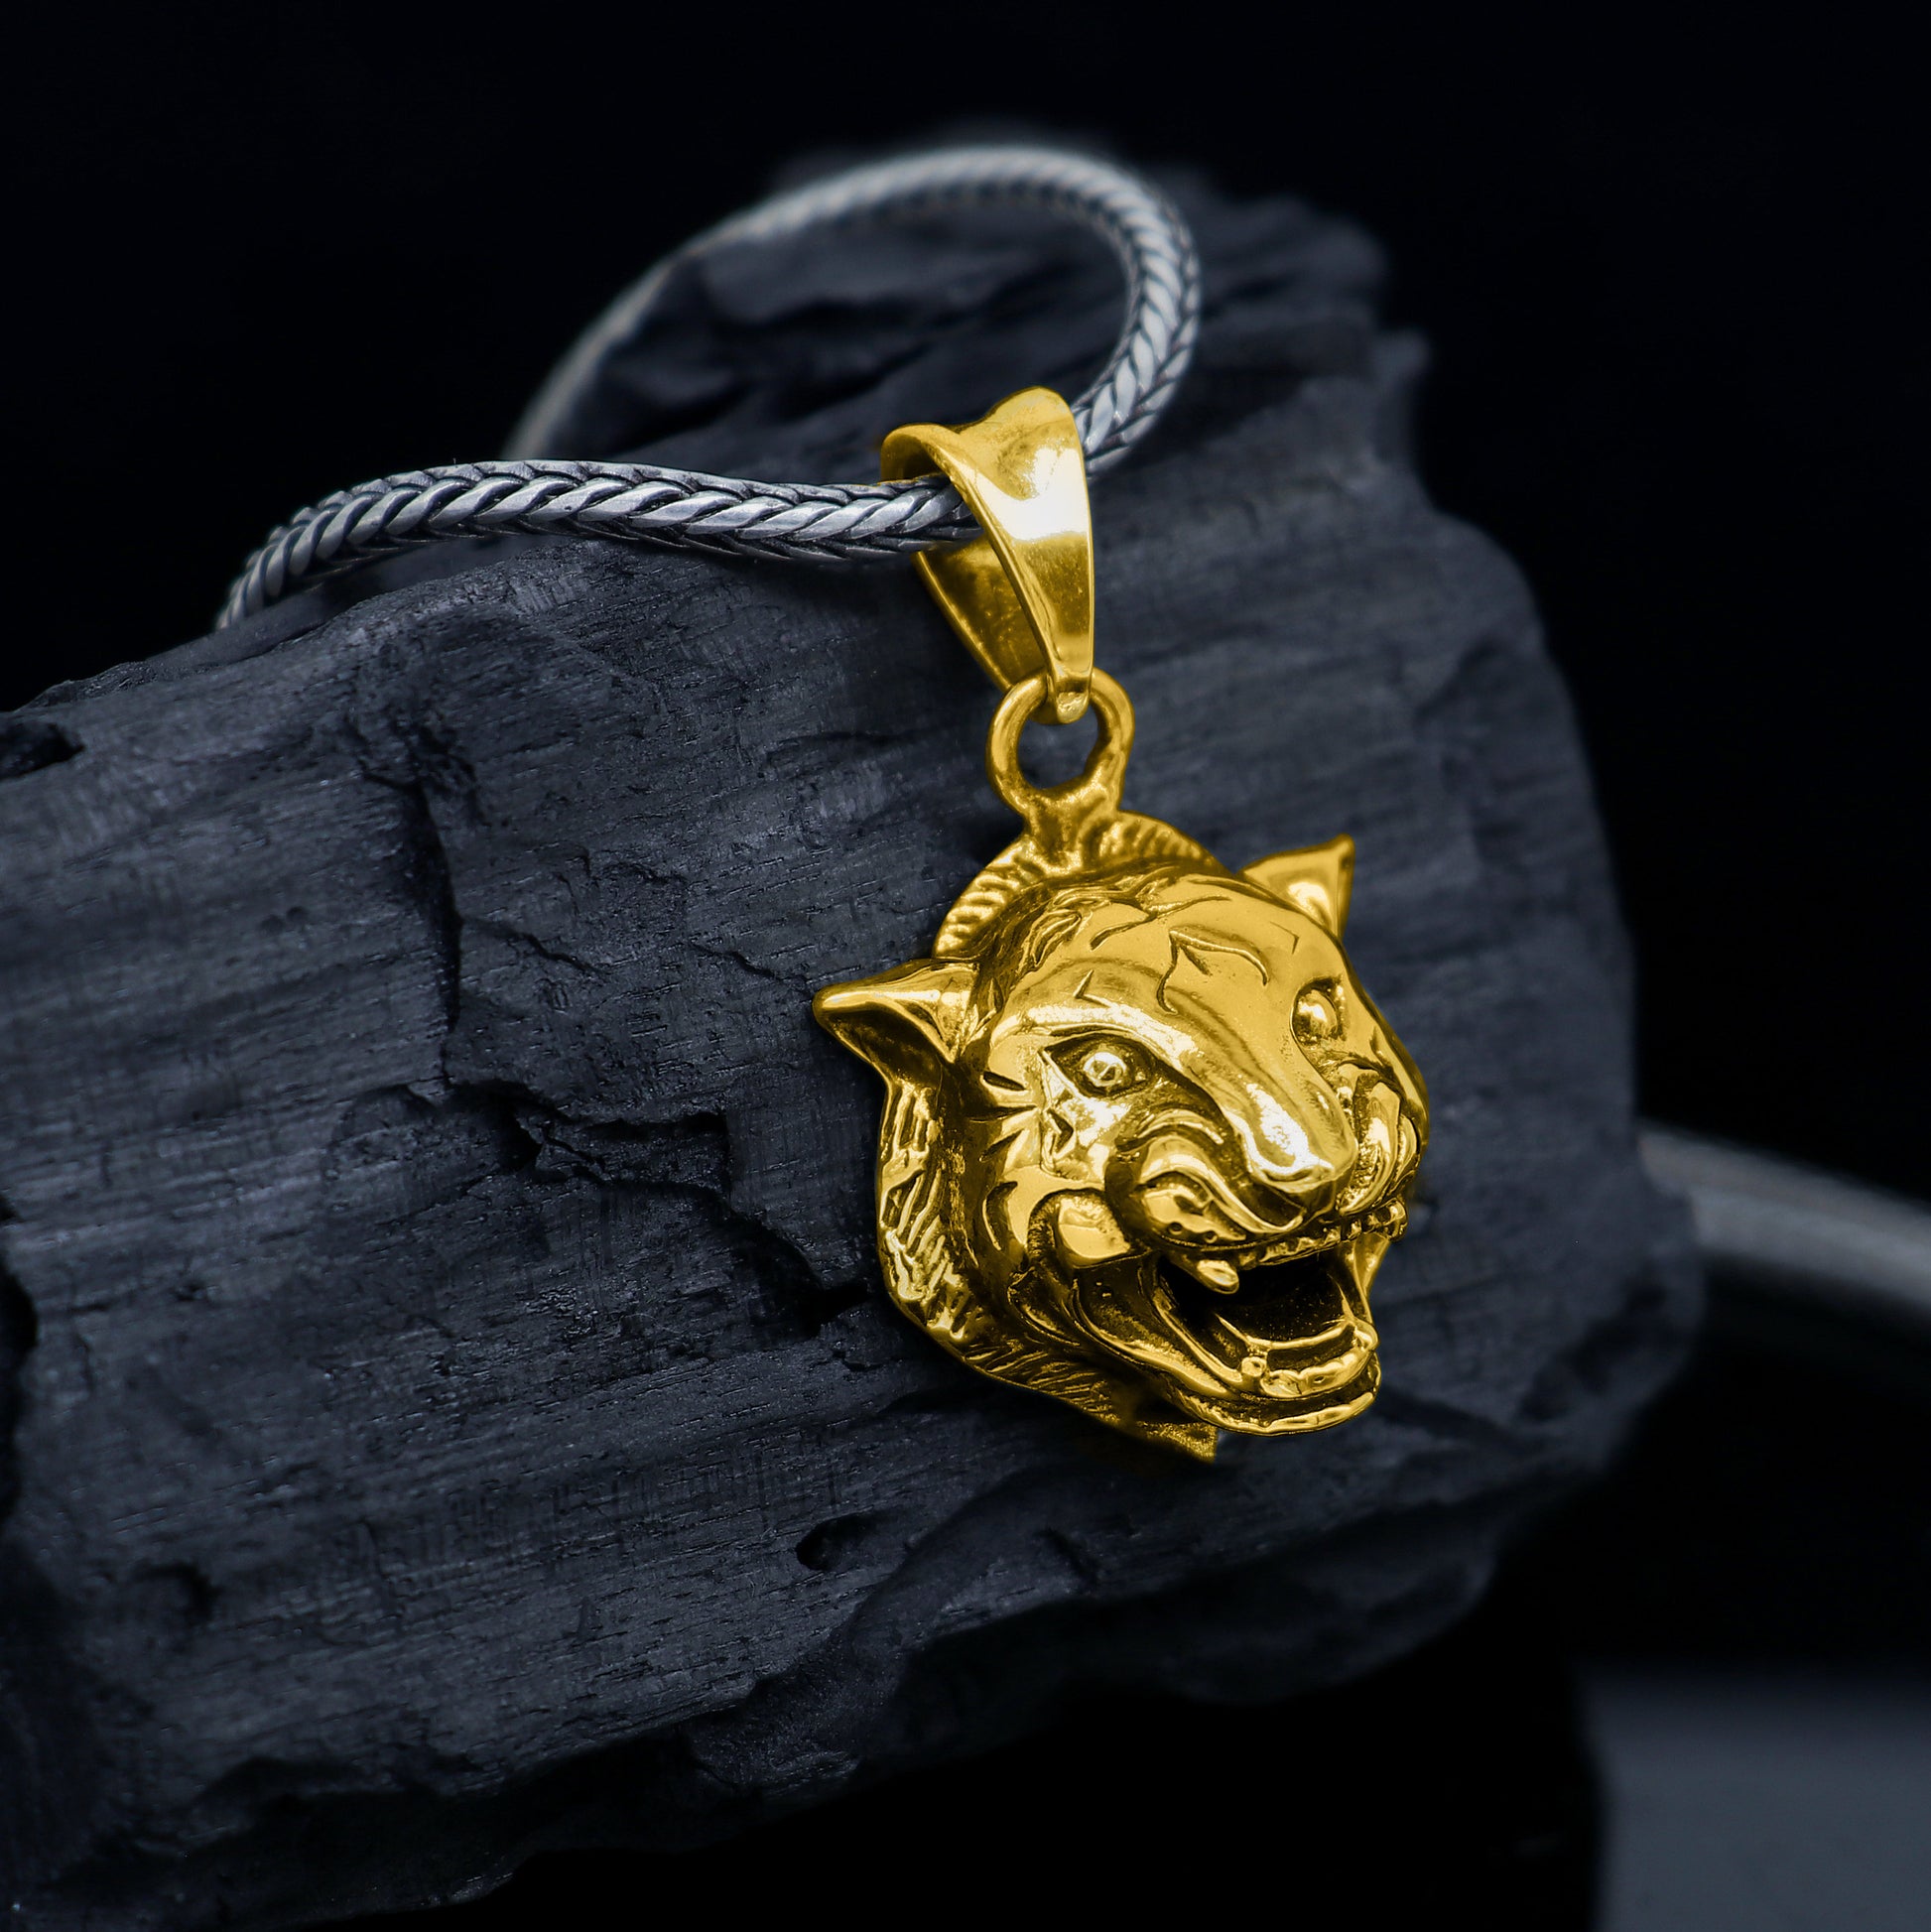 925 sterling silver LION FACE pendant symbolizes qualities associated with lions, such as courage, strength, and leadership nsp707 - TRIBAL ORNAMENTS